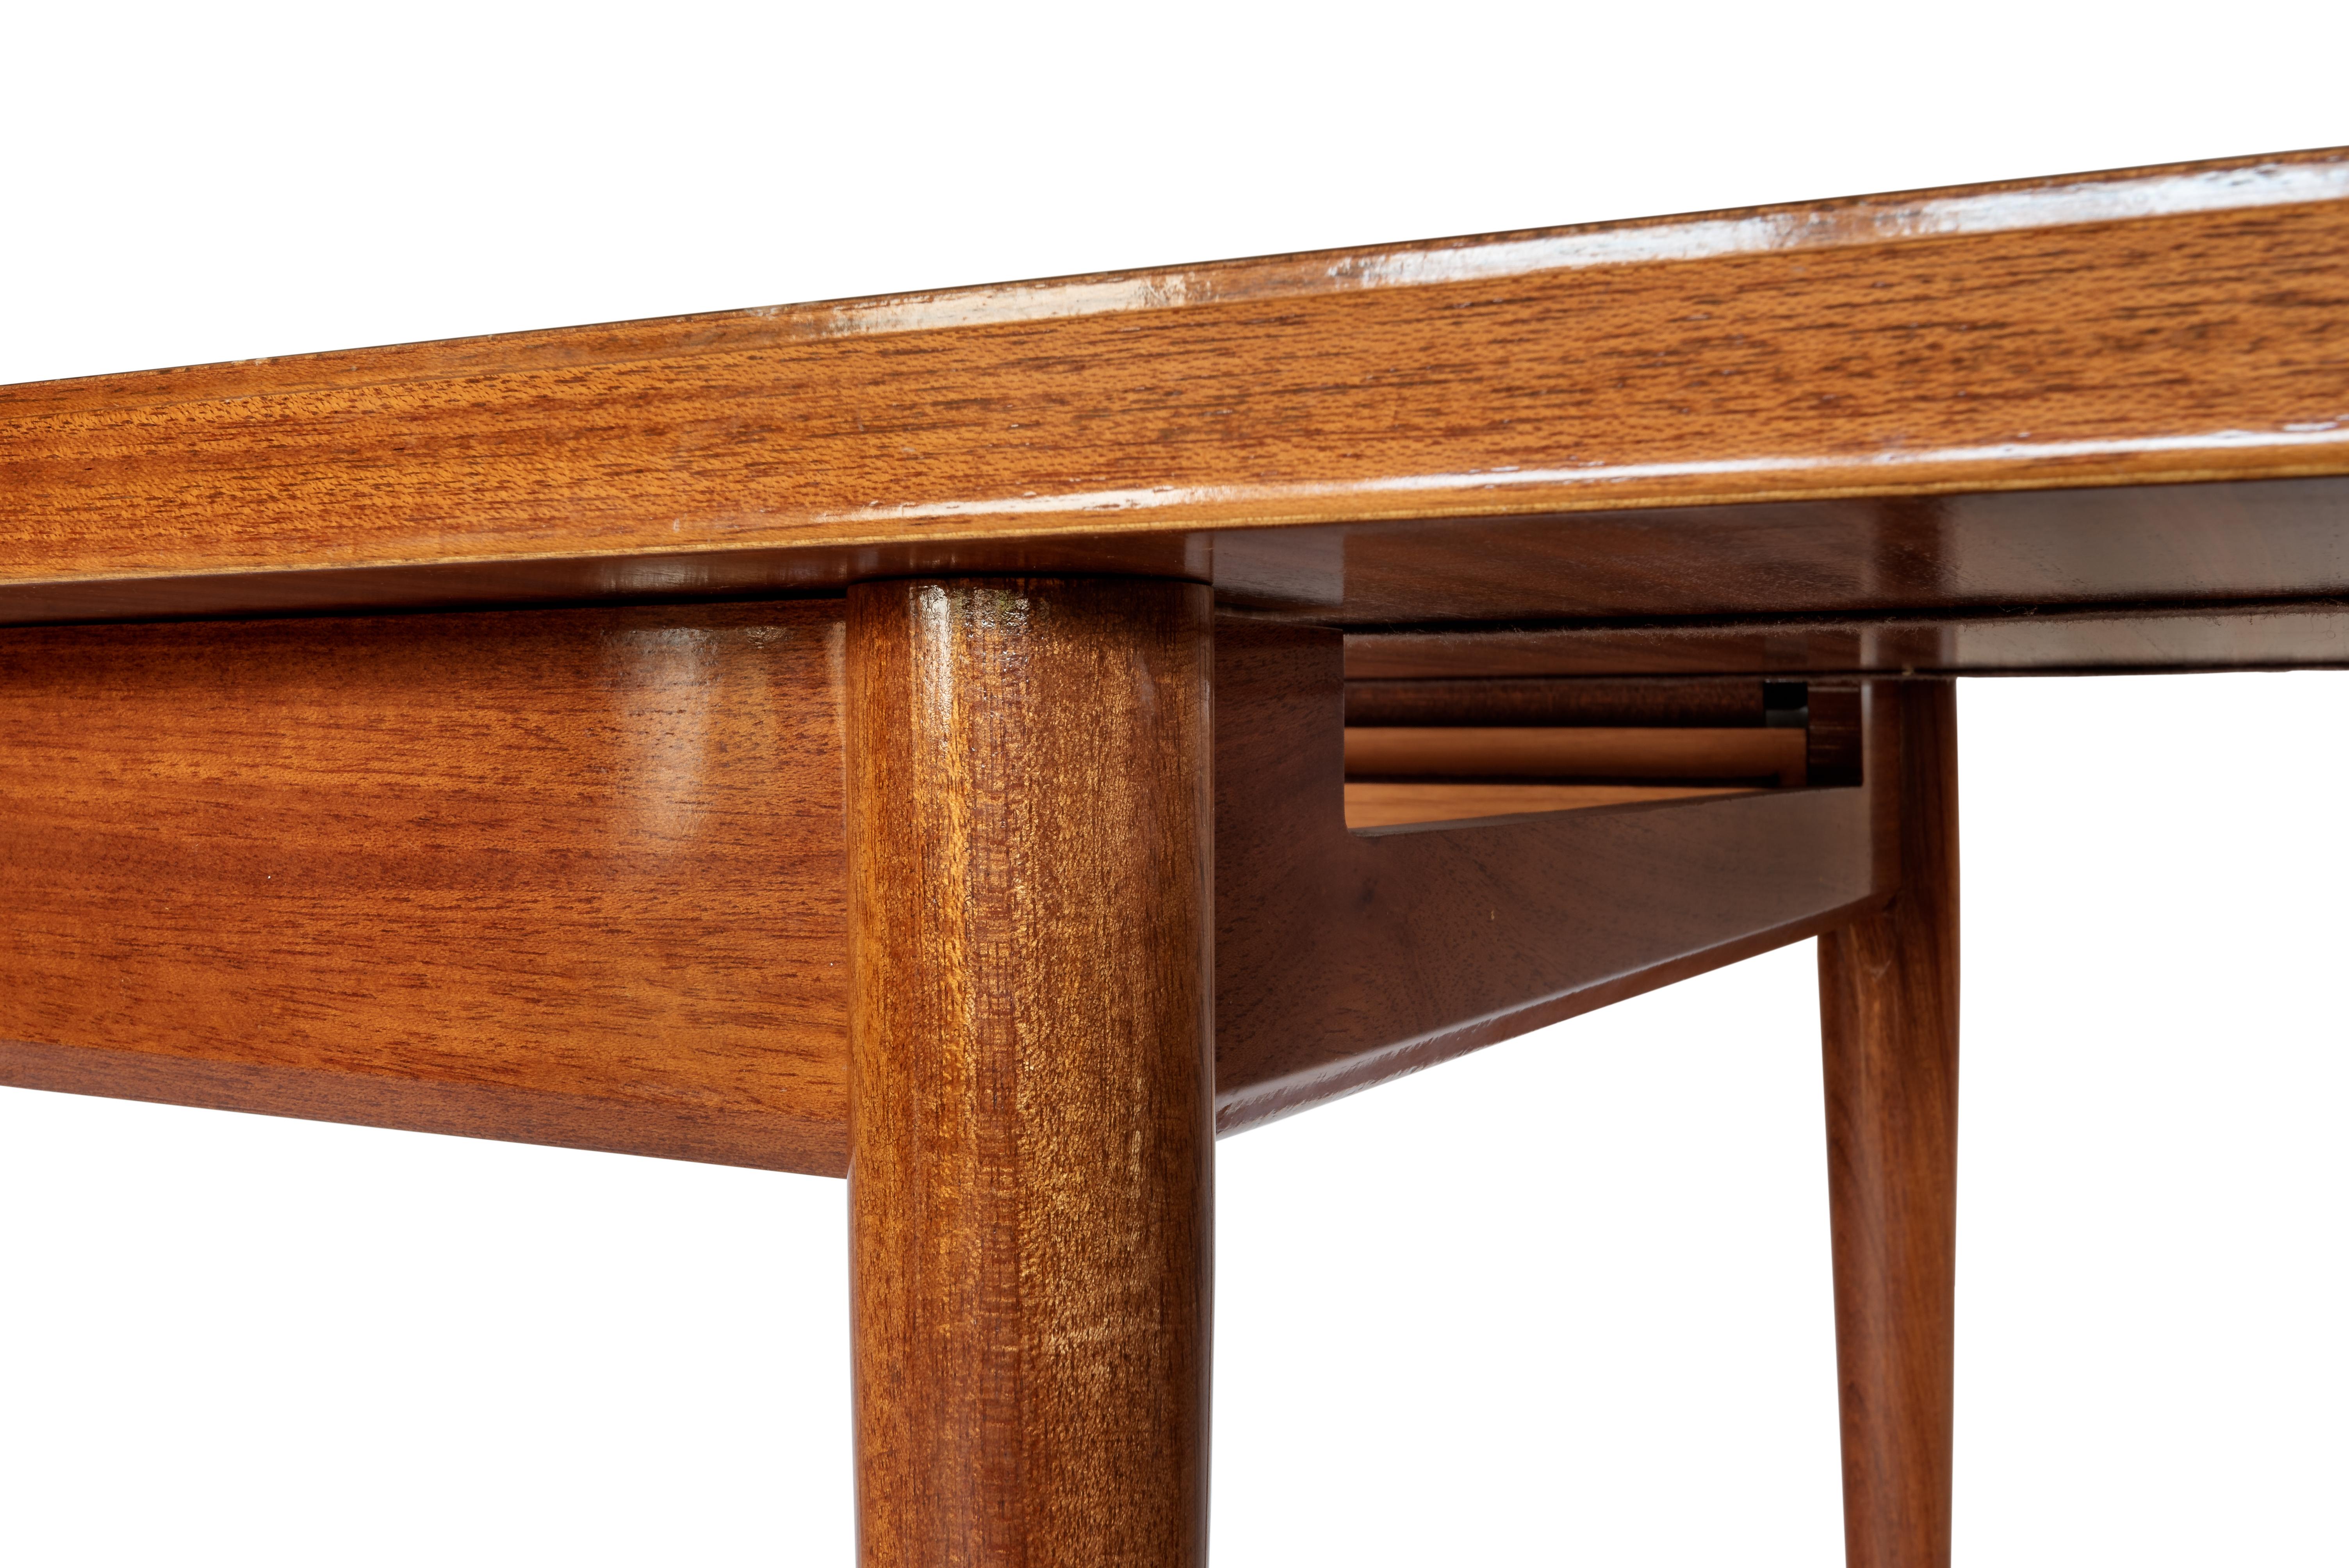 English Midcentury Rosewood Extensible Dinning Table L. Layton & M. Lazarus for Uniflex